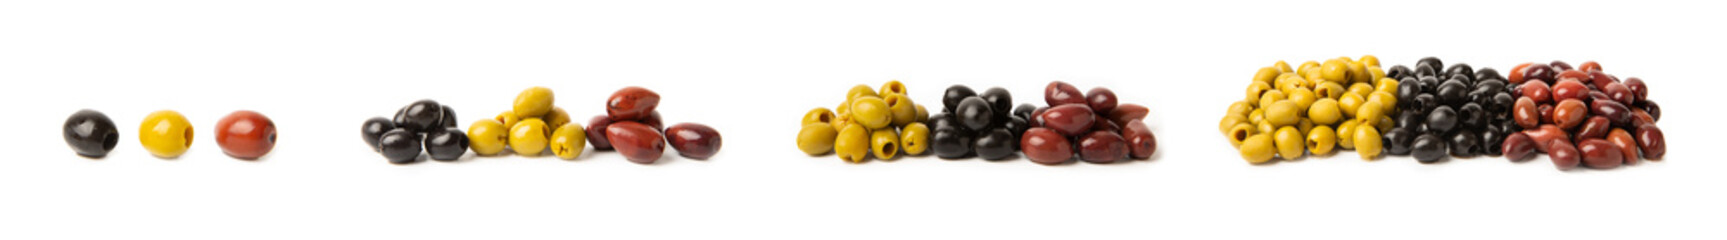 Set of green, red and black olives isolated on a white background. Various types of olives and...